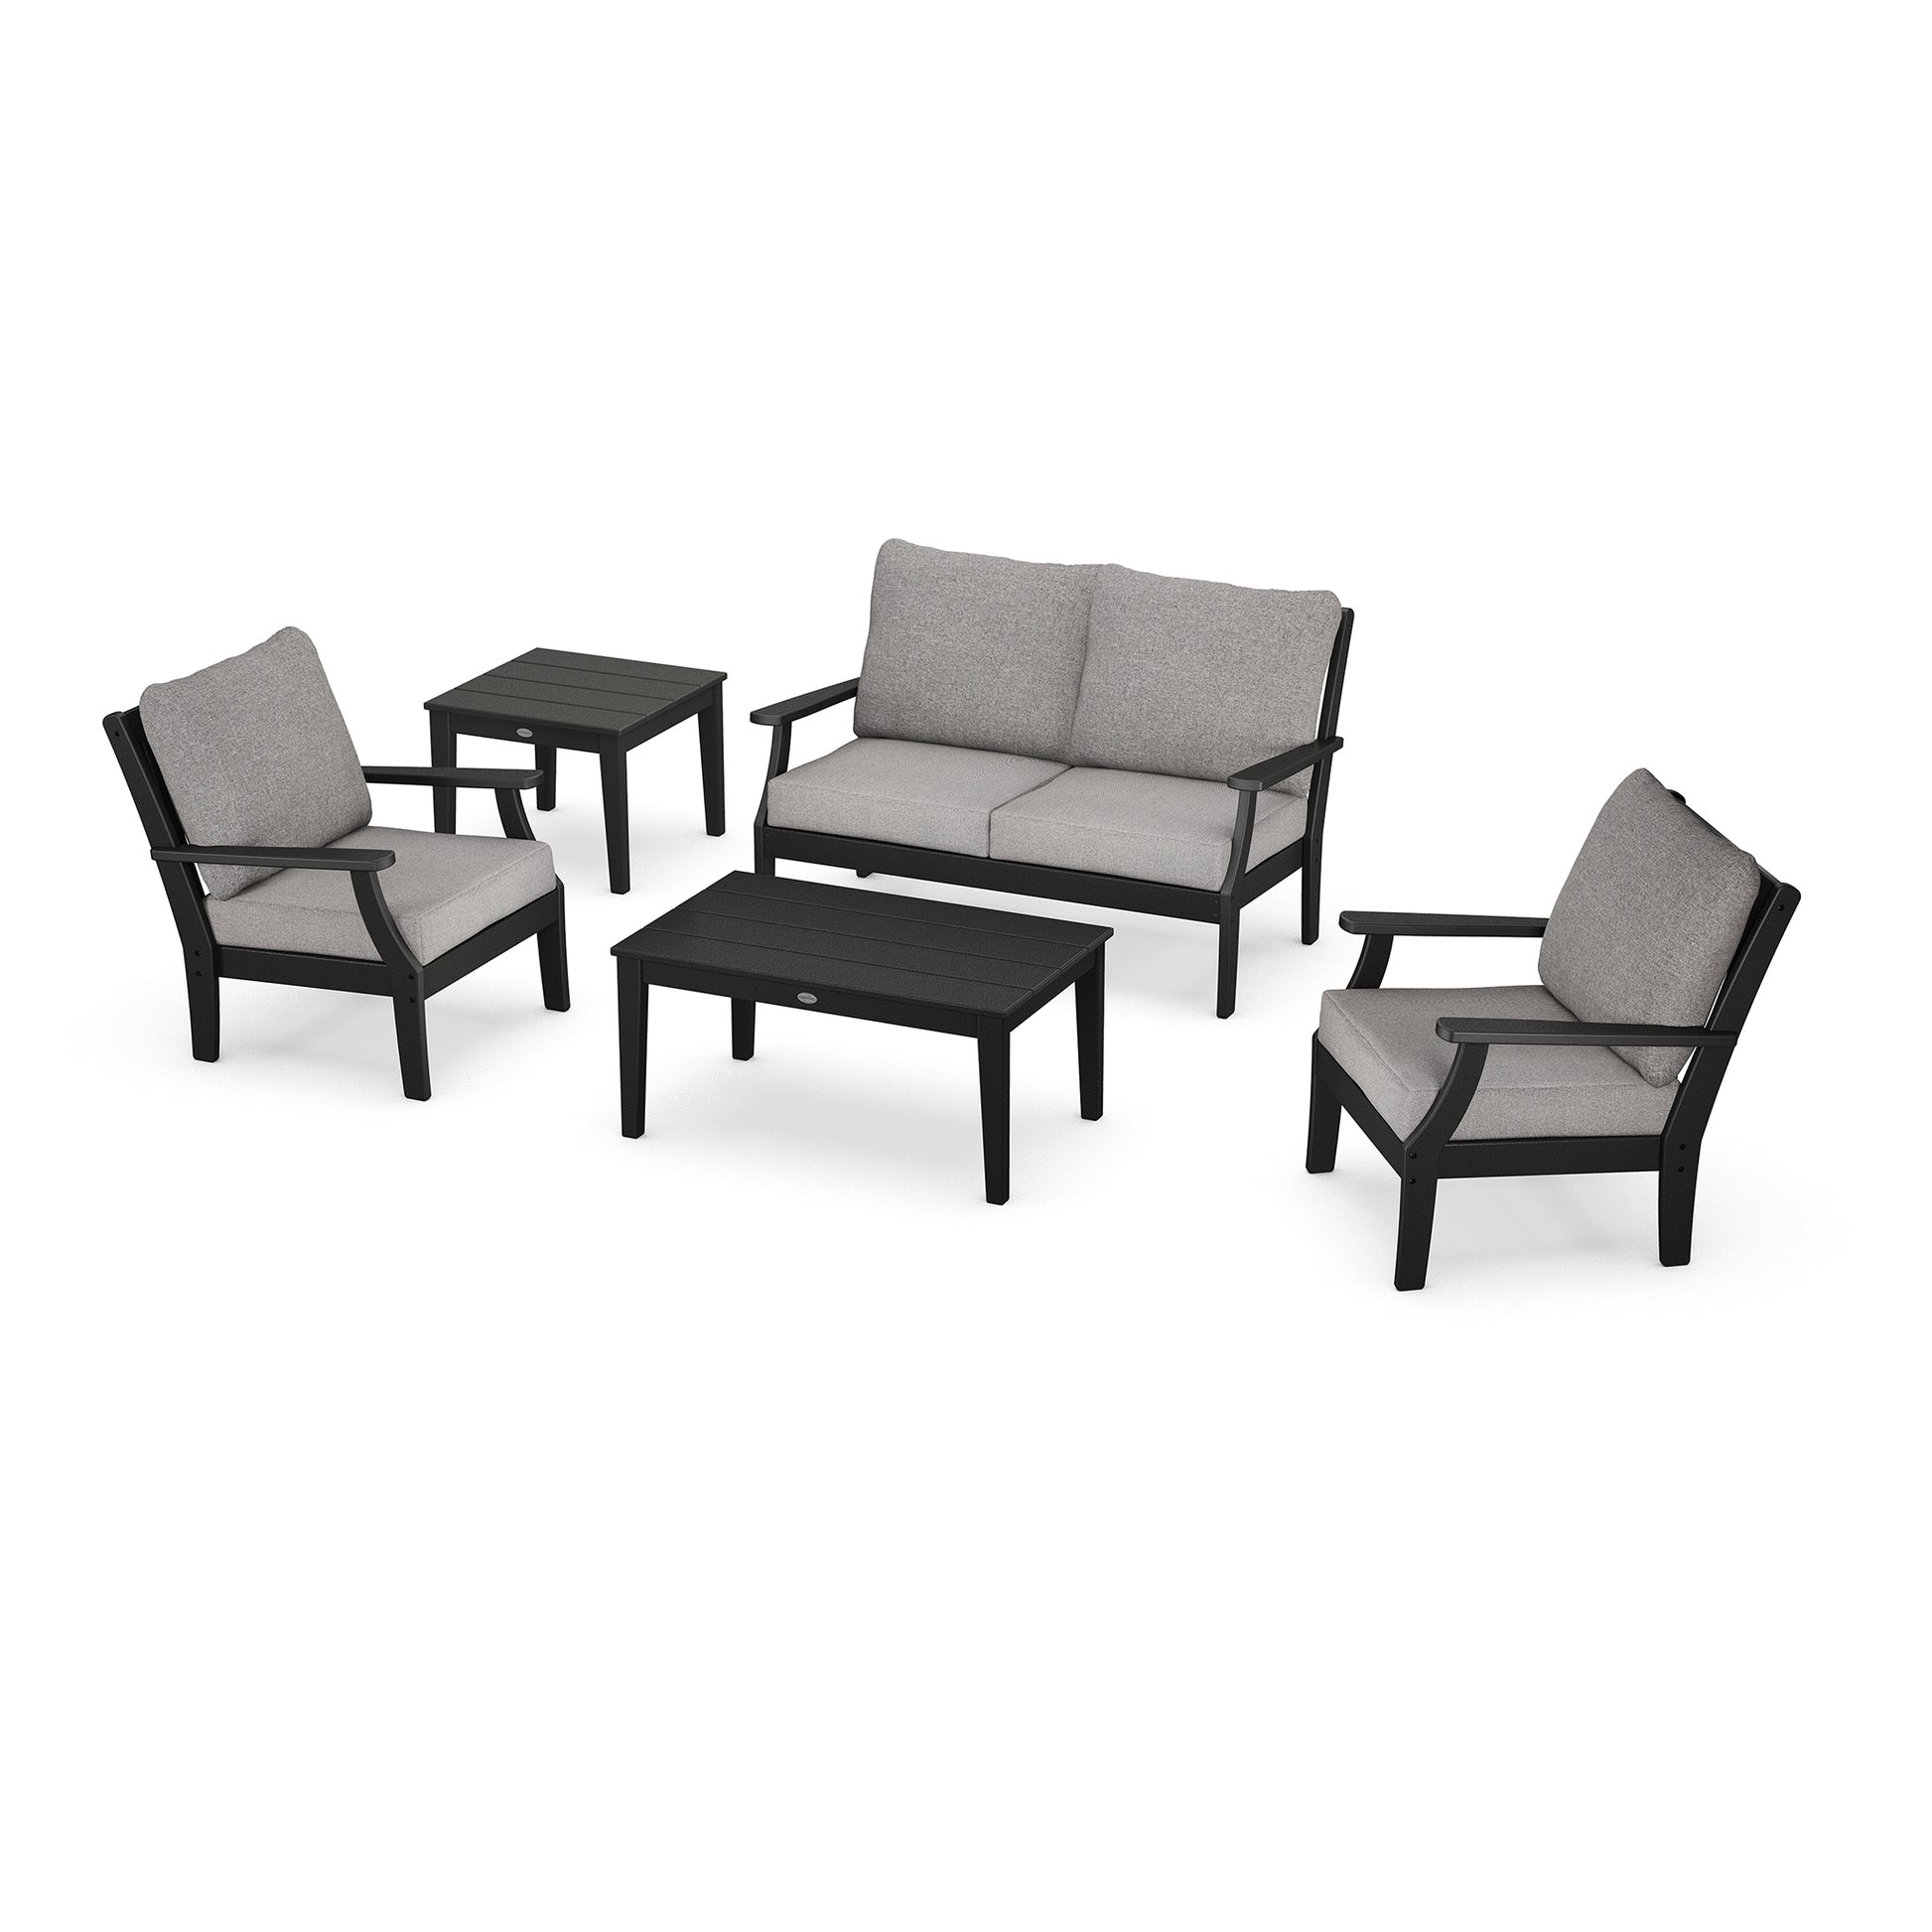 A modern POLYWOOD Braxton 5-Piece Deep Seating Set featuring two single chairs, one double sofa, and two tables, all with dark frames and light gray cushions, arranged on a white background.